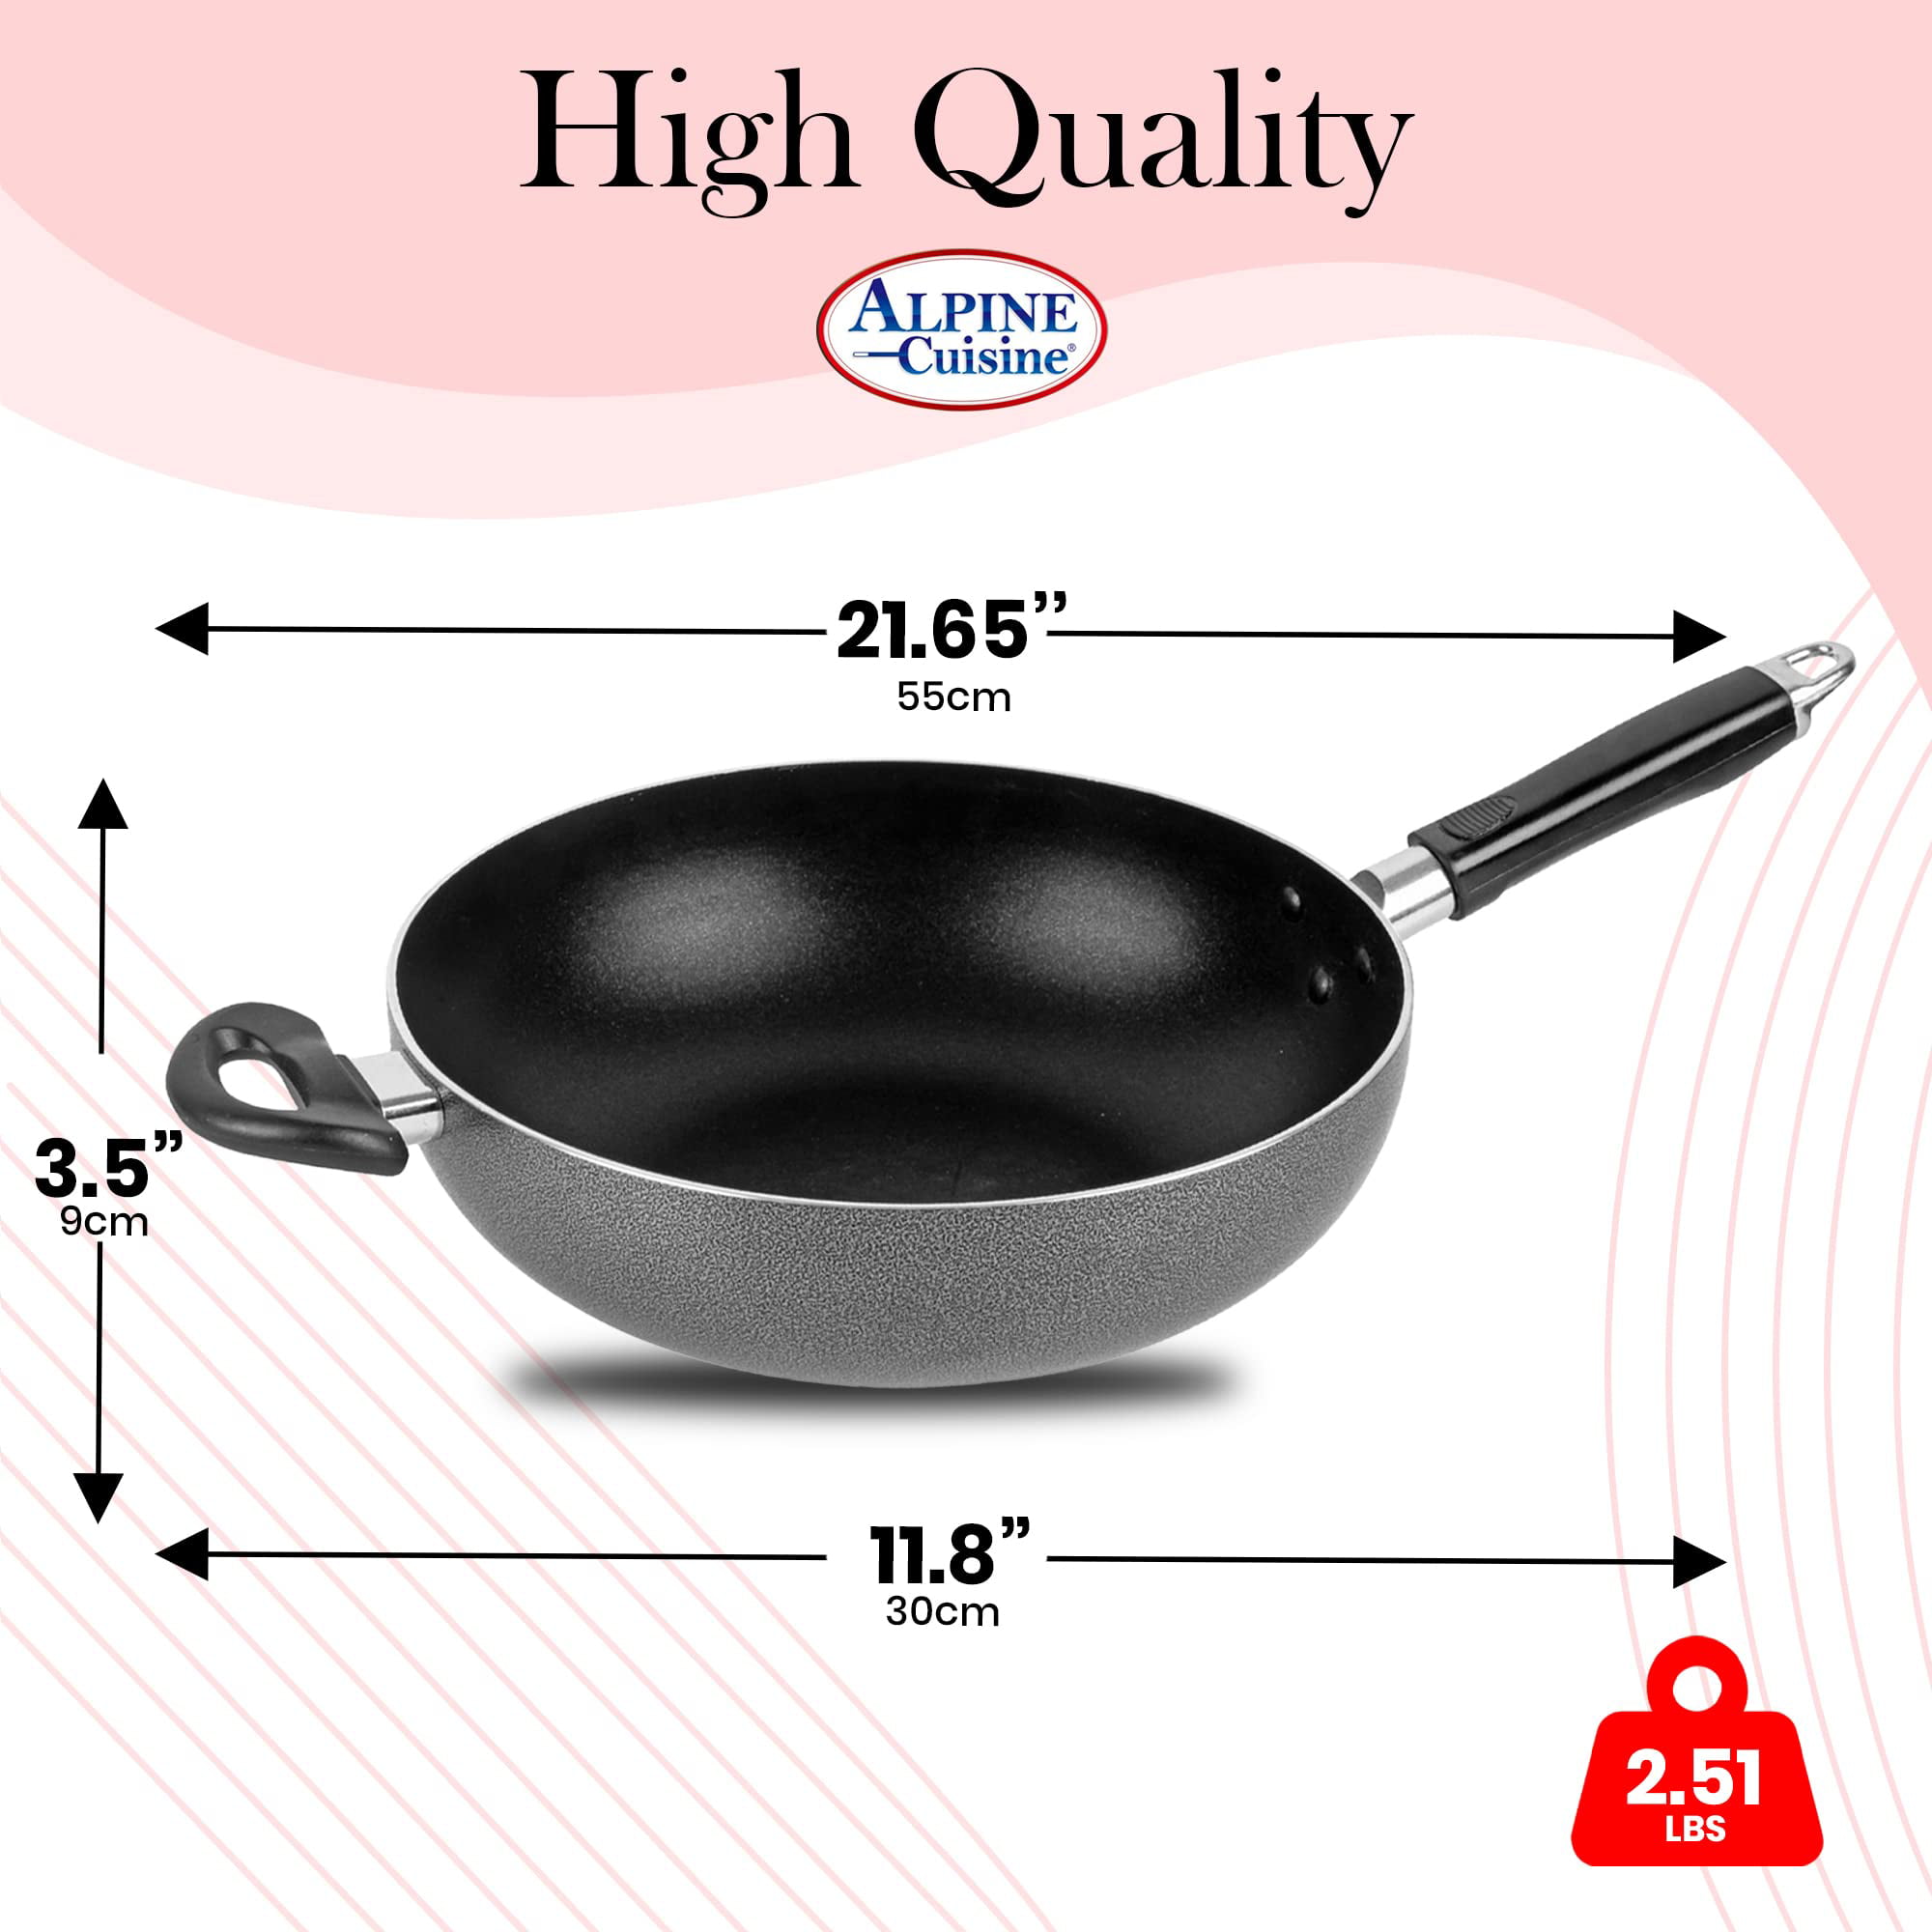 Alpine Cuisine Fry Pan 12-Inch Nonstick Coating Gray, Frying Pans Nonstick  for Stove with Stay Cool & Comfortable Handle, Durable Nonstick Cookware